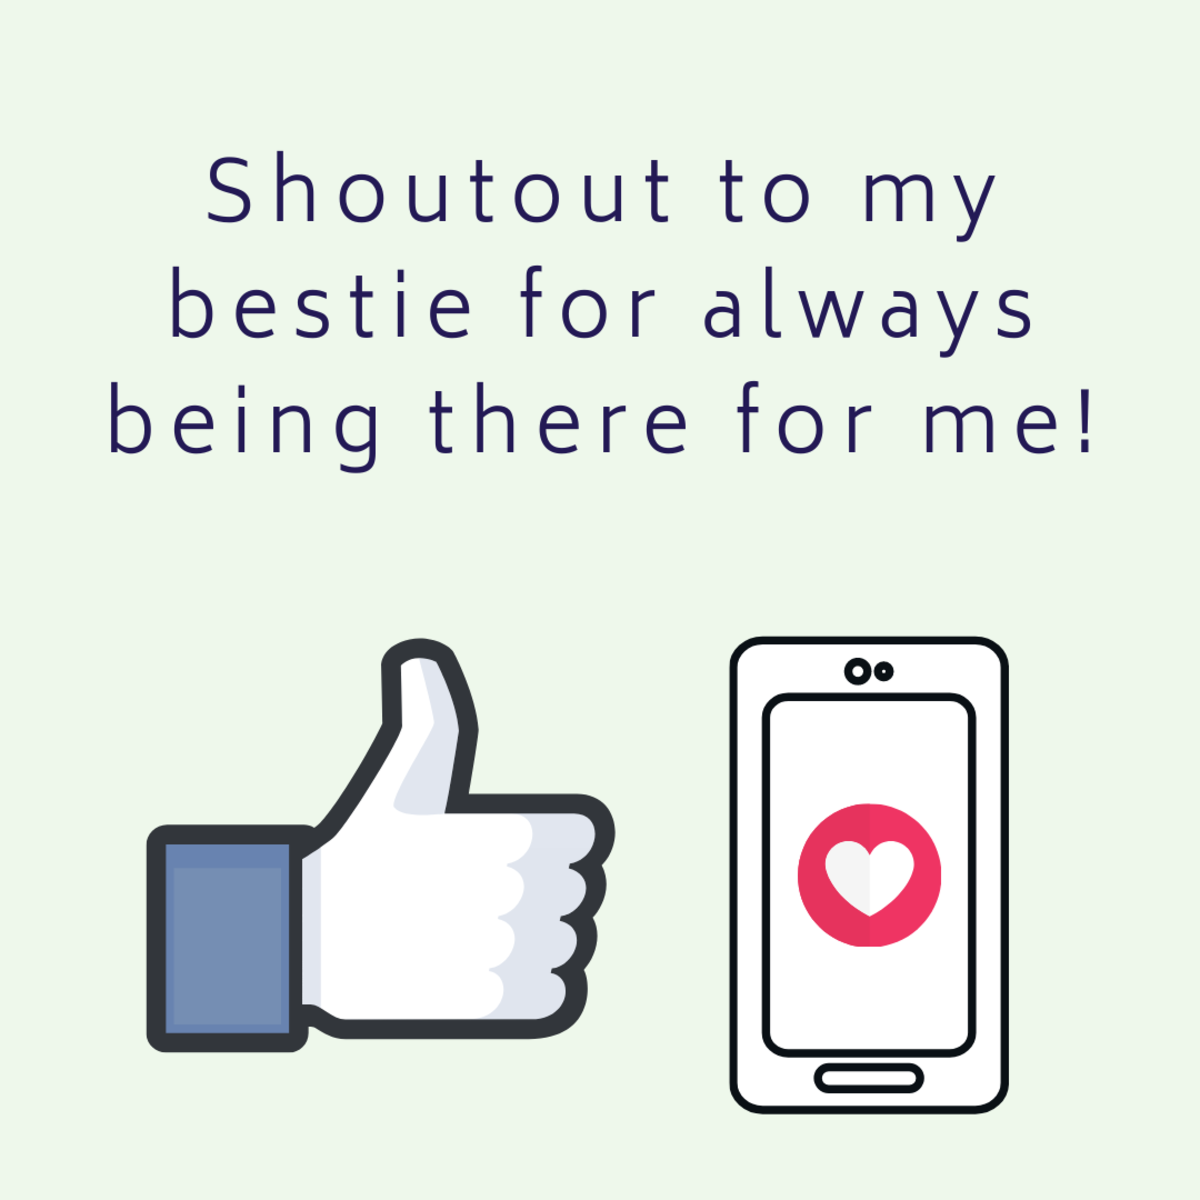 Tag your best bud to let the whole world know how much they mean to you!